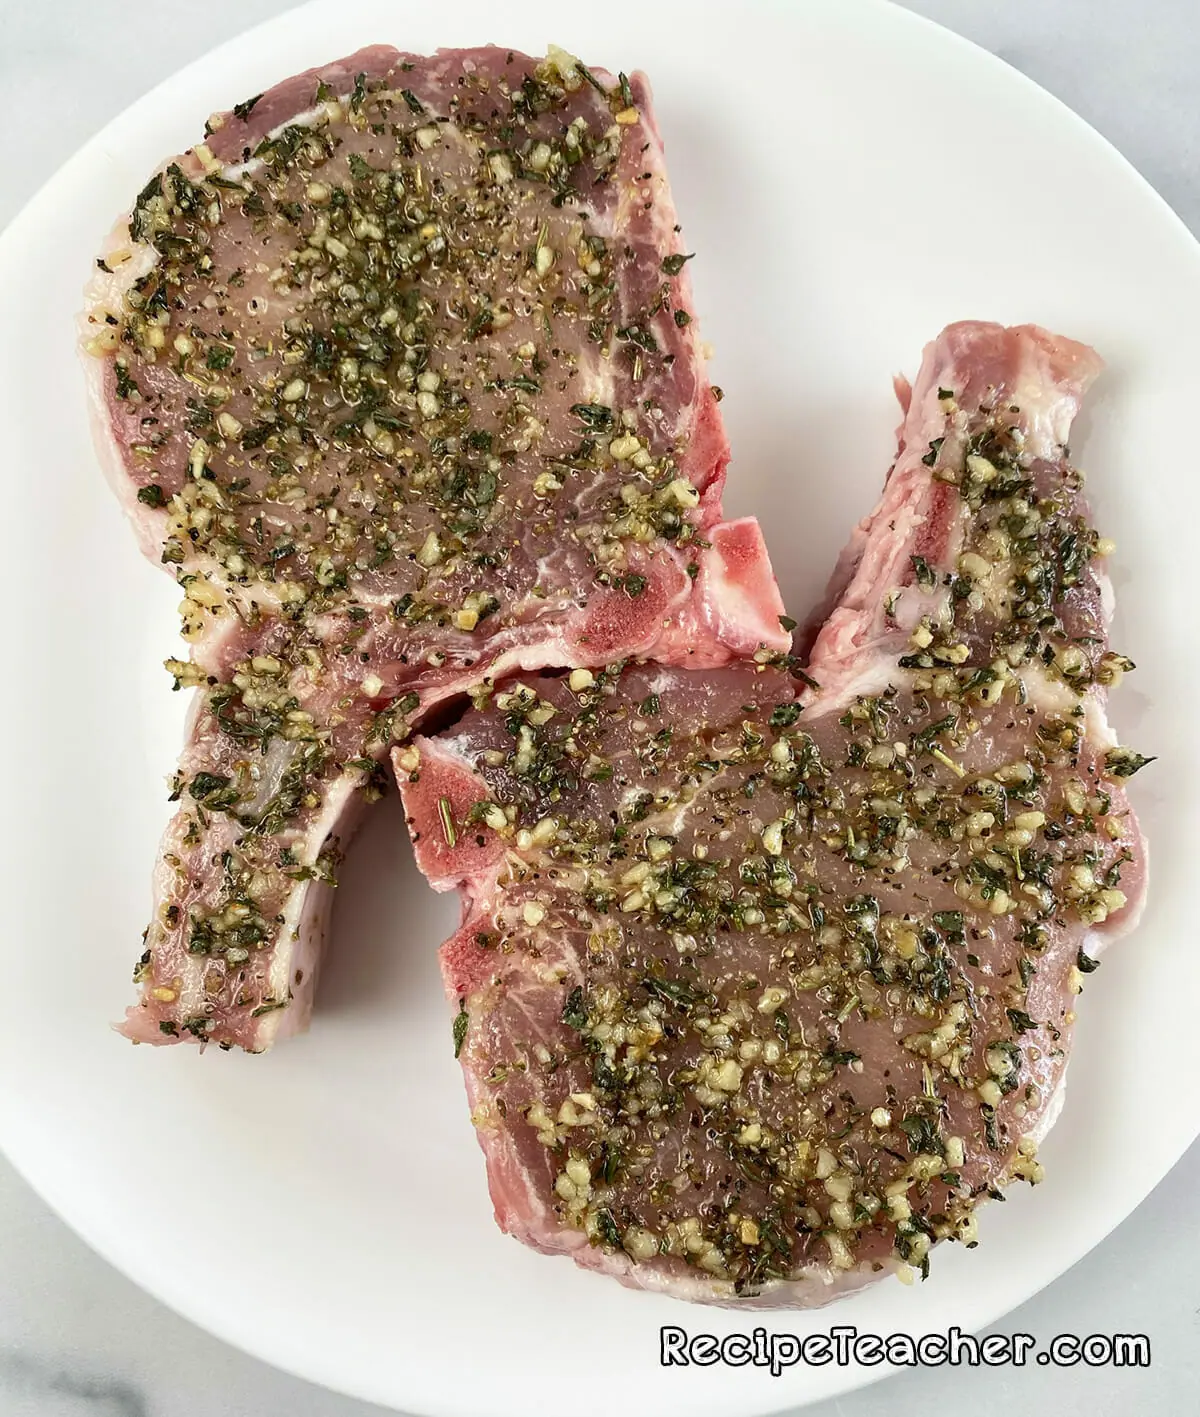 Recipe for thick and juicy air fryer pork chops. Pork chops are seasoned and ready for the air fryer. 